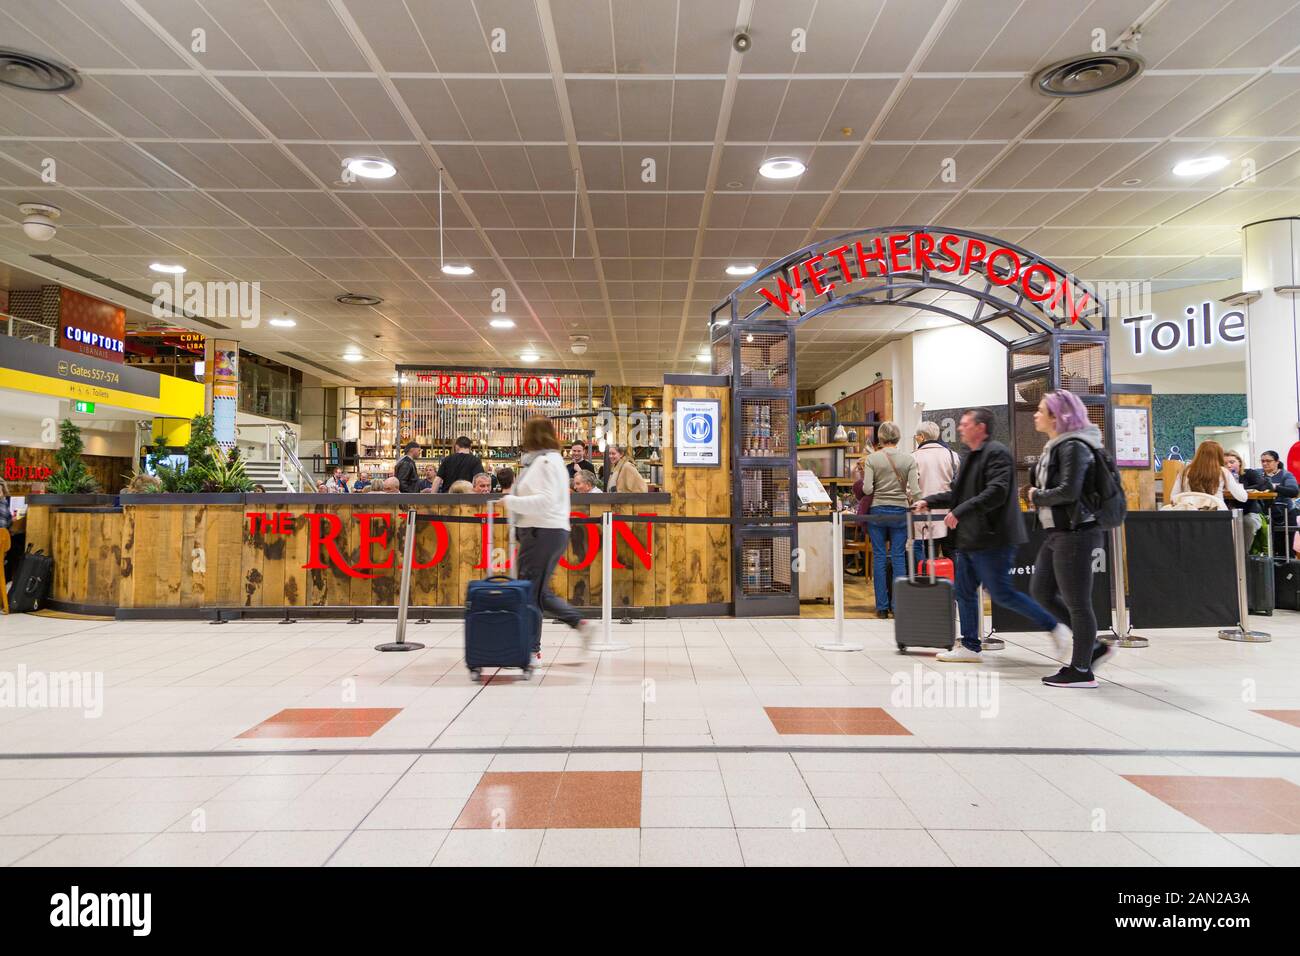 The red lion pub, wetherspoon, gatwick airport departure lounge, uk Stock Photo